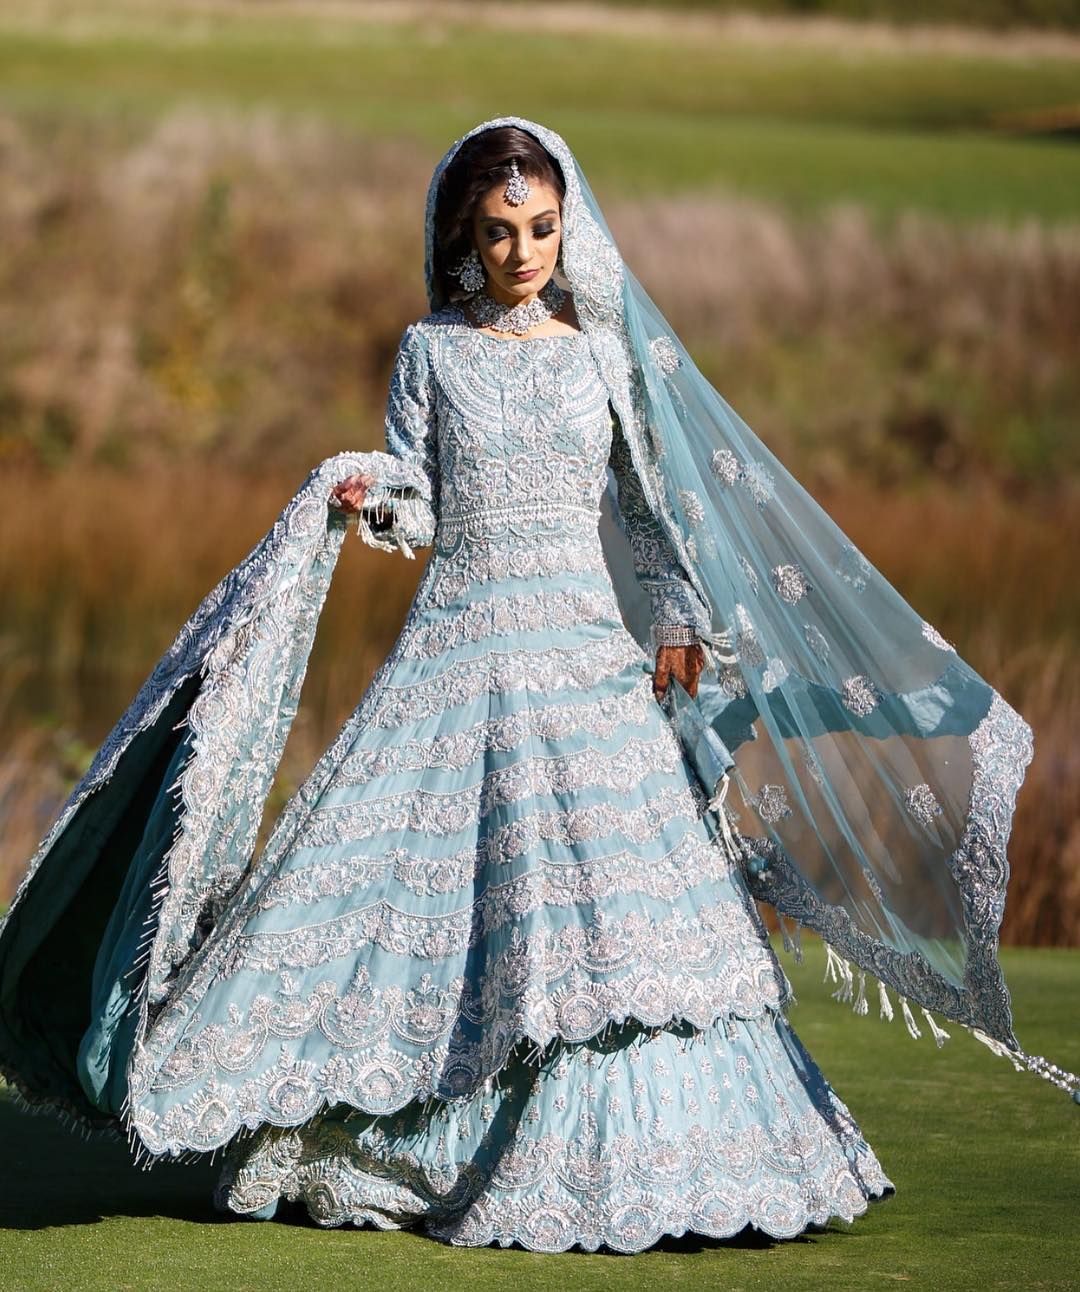 Take Inspo From Real Brides Who Wore Stunning Pastel Bridal Outfits |  Indian wedding outfits, Blue bridal lehenga, Indian bridal outfits